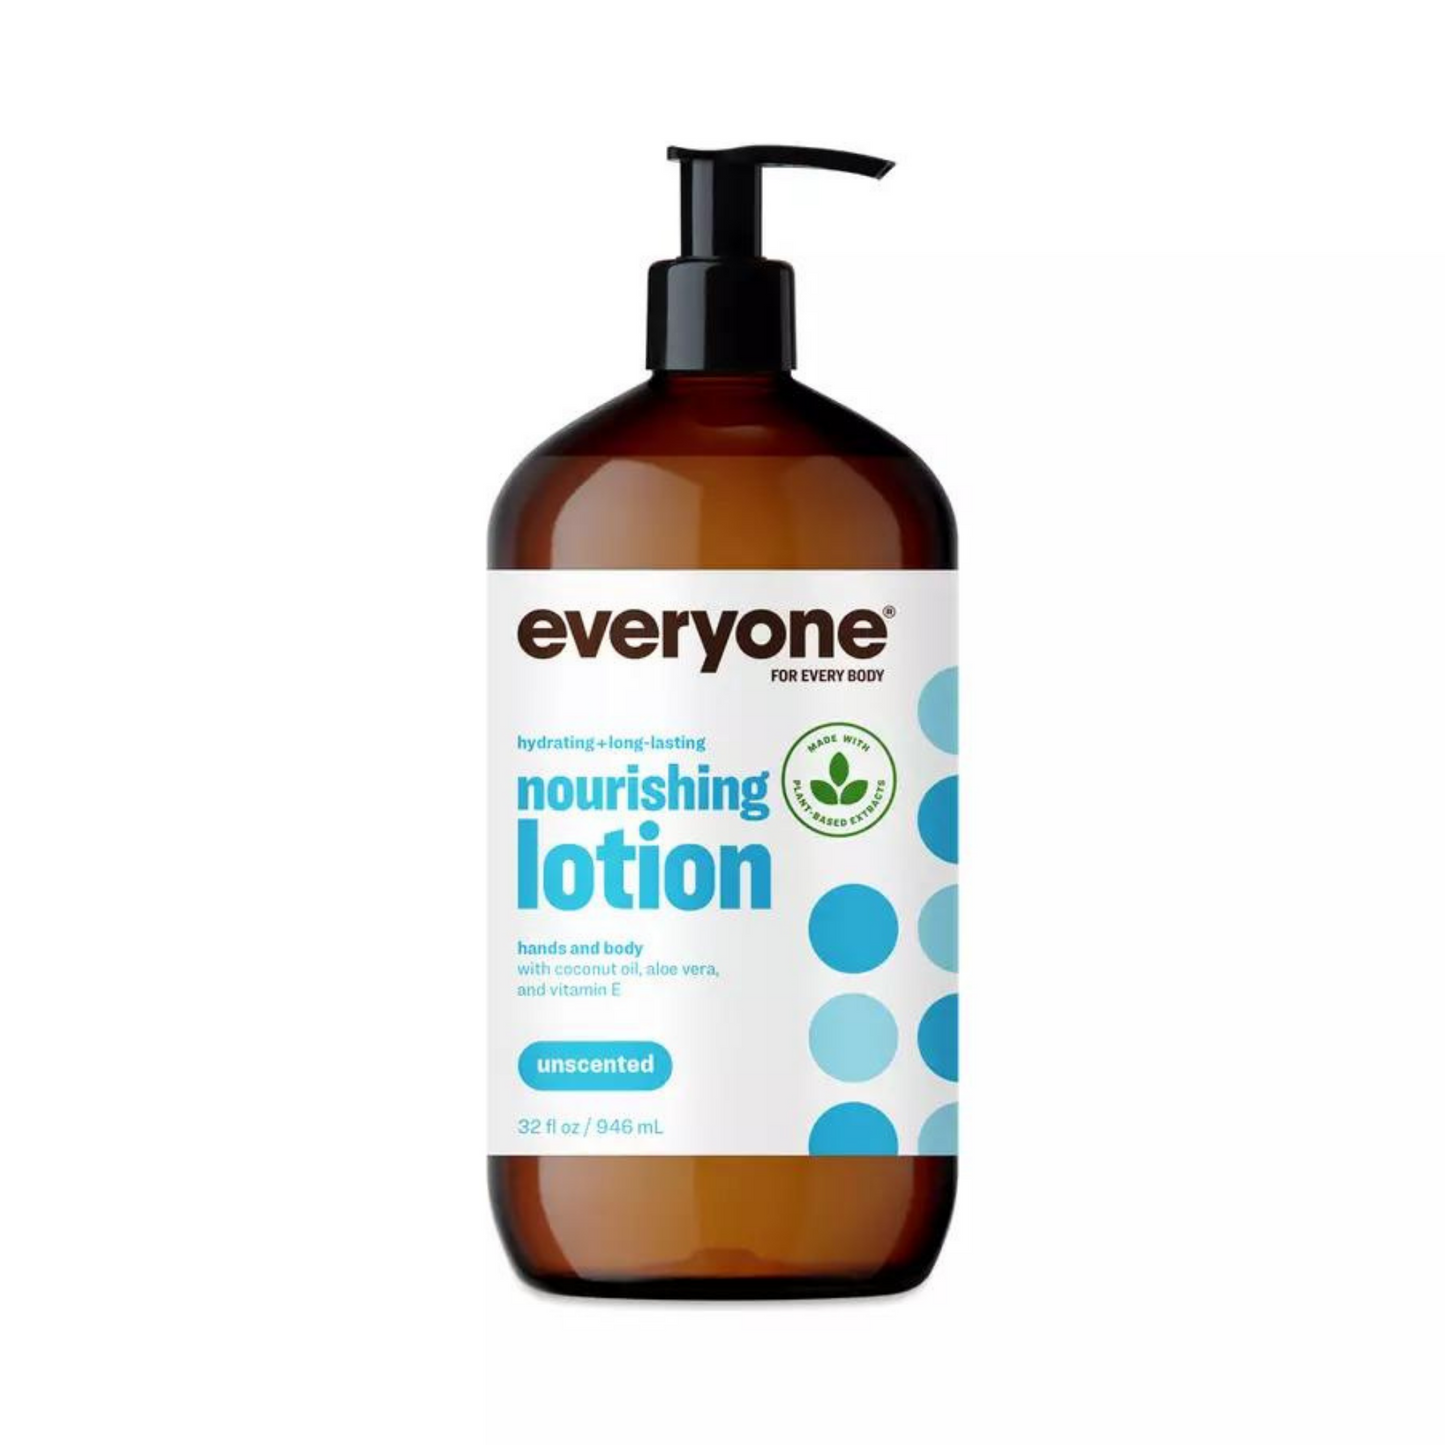 Primary image of Everyone Nourishing Lotion - Unscented